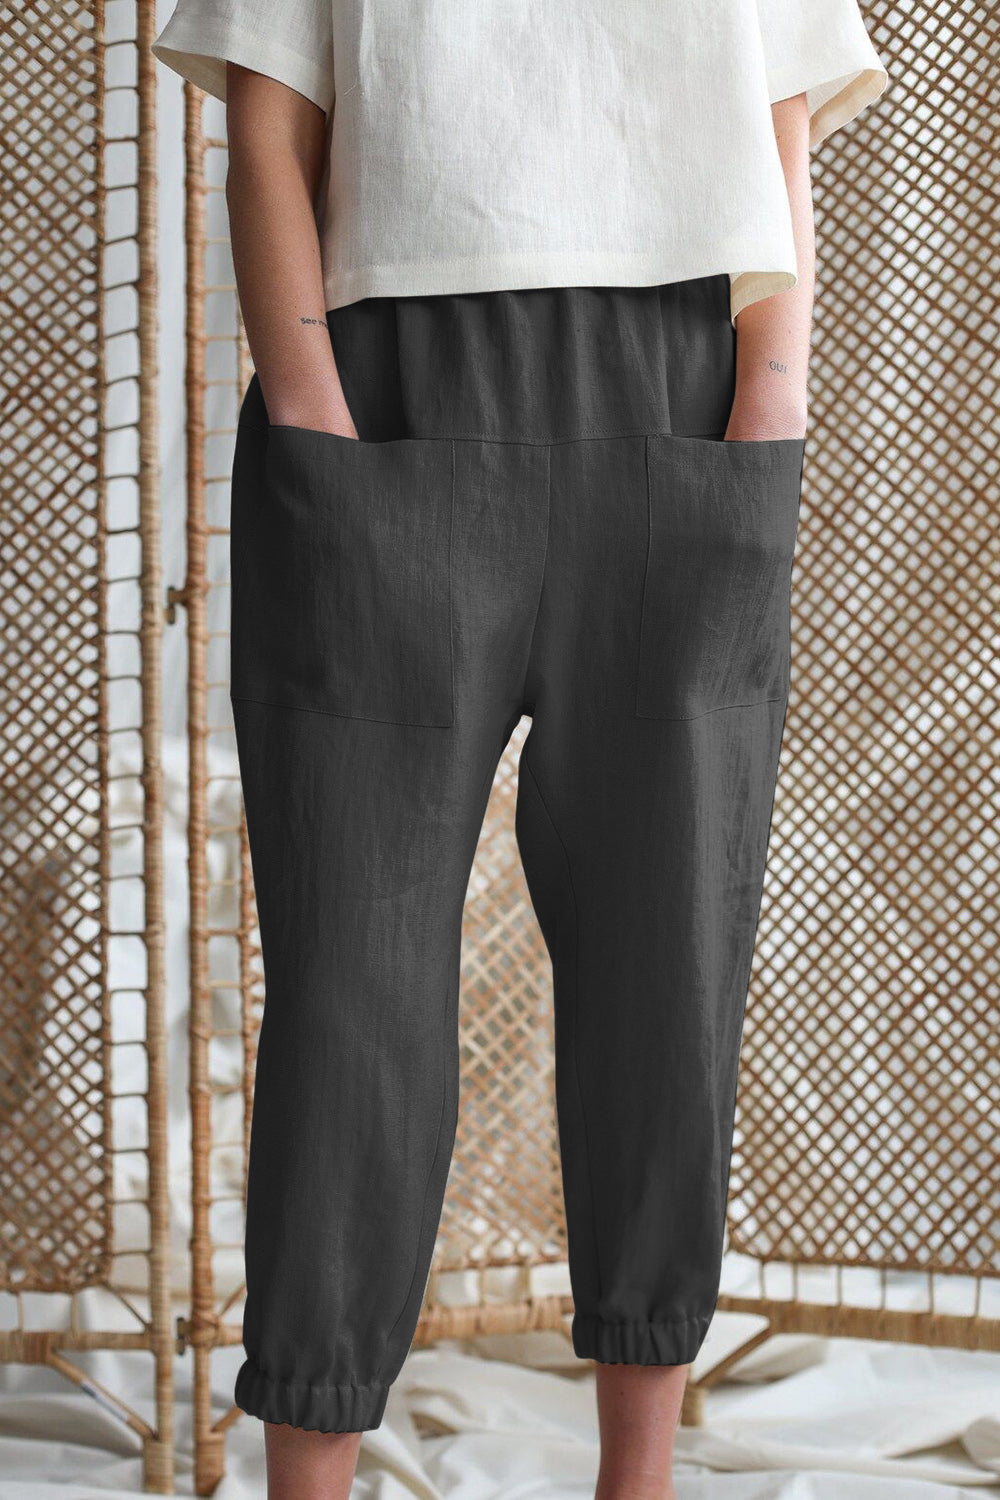 Mid-Rise Waist Pants with Pockets - 3 Colors